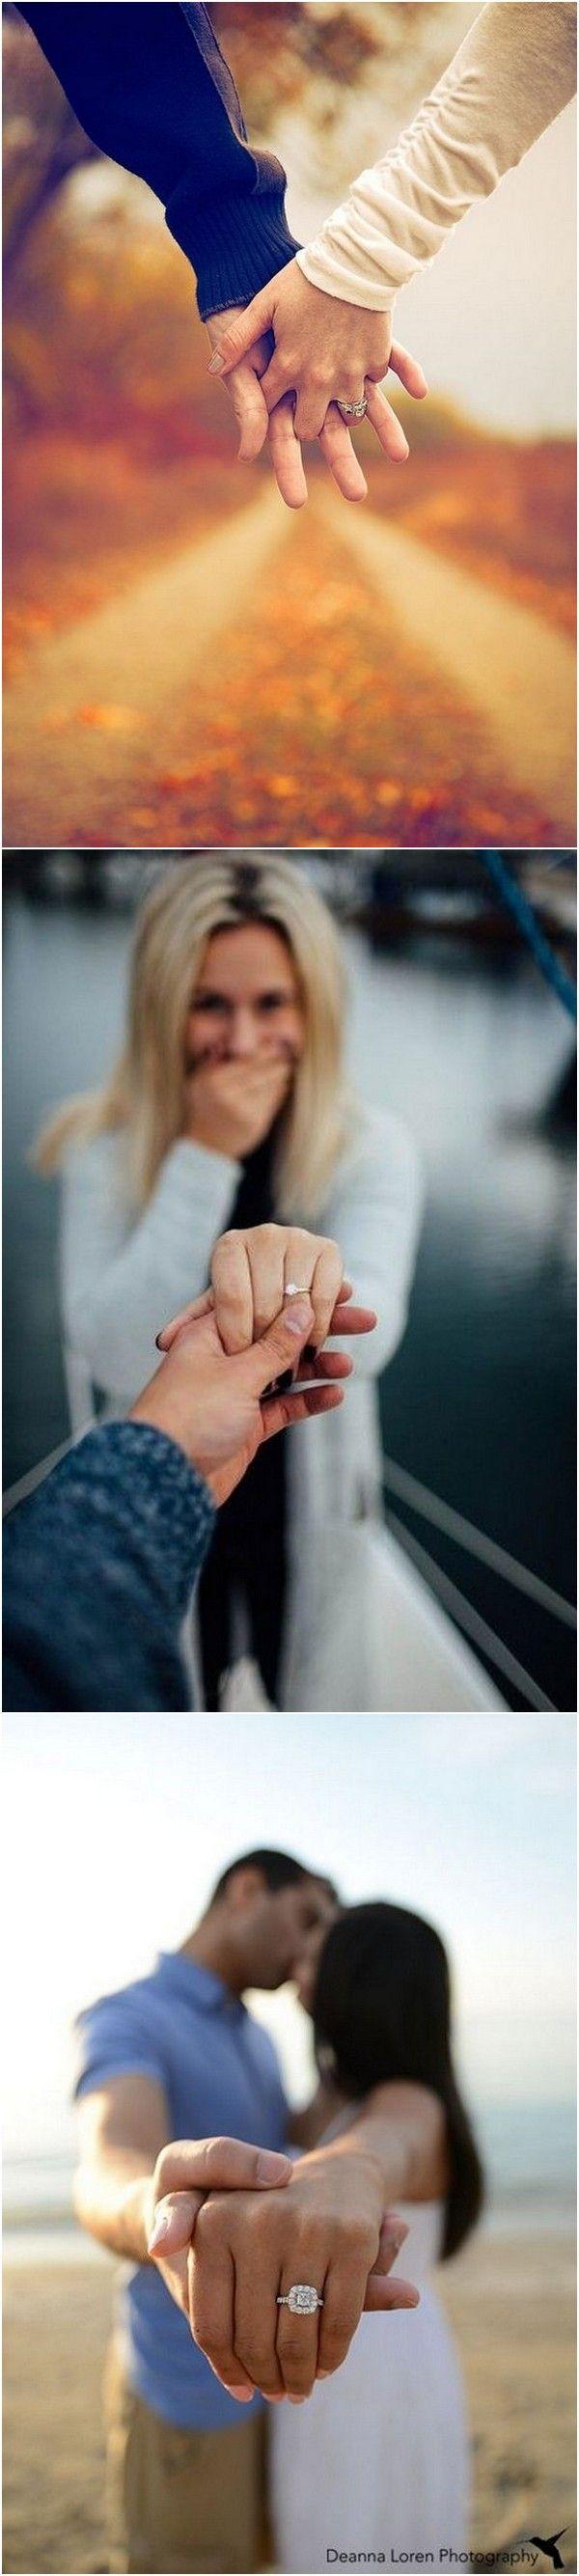 Hochzeit - Top 20 Engagement Photo Ideas To Love - Page 2 Of 2